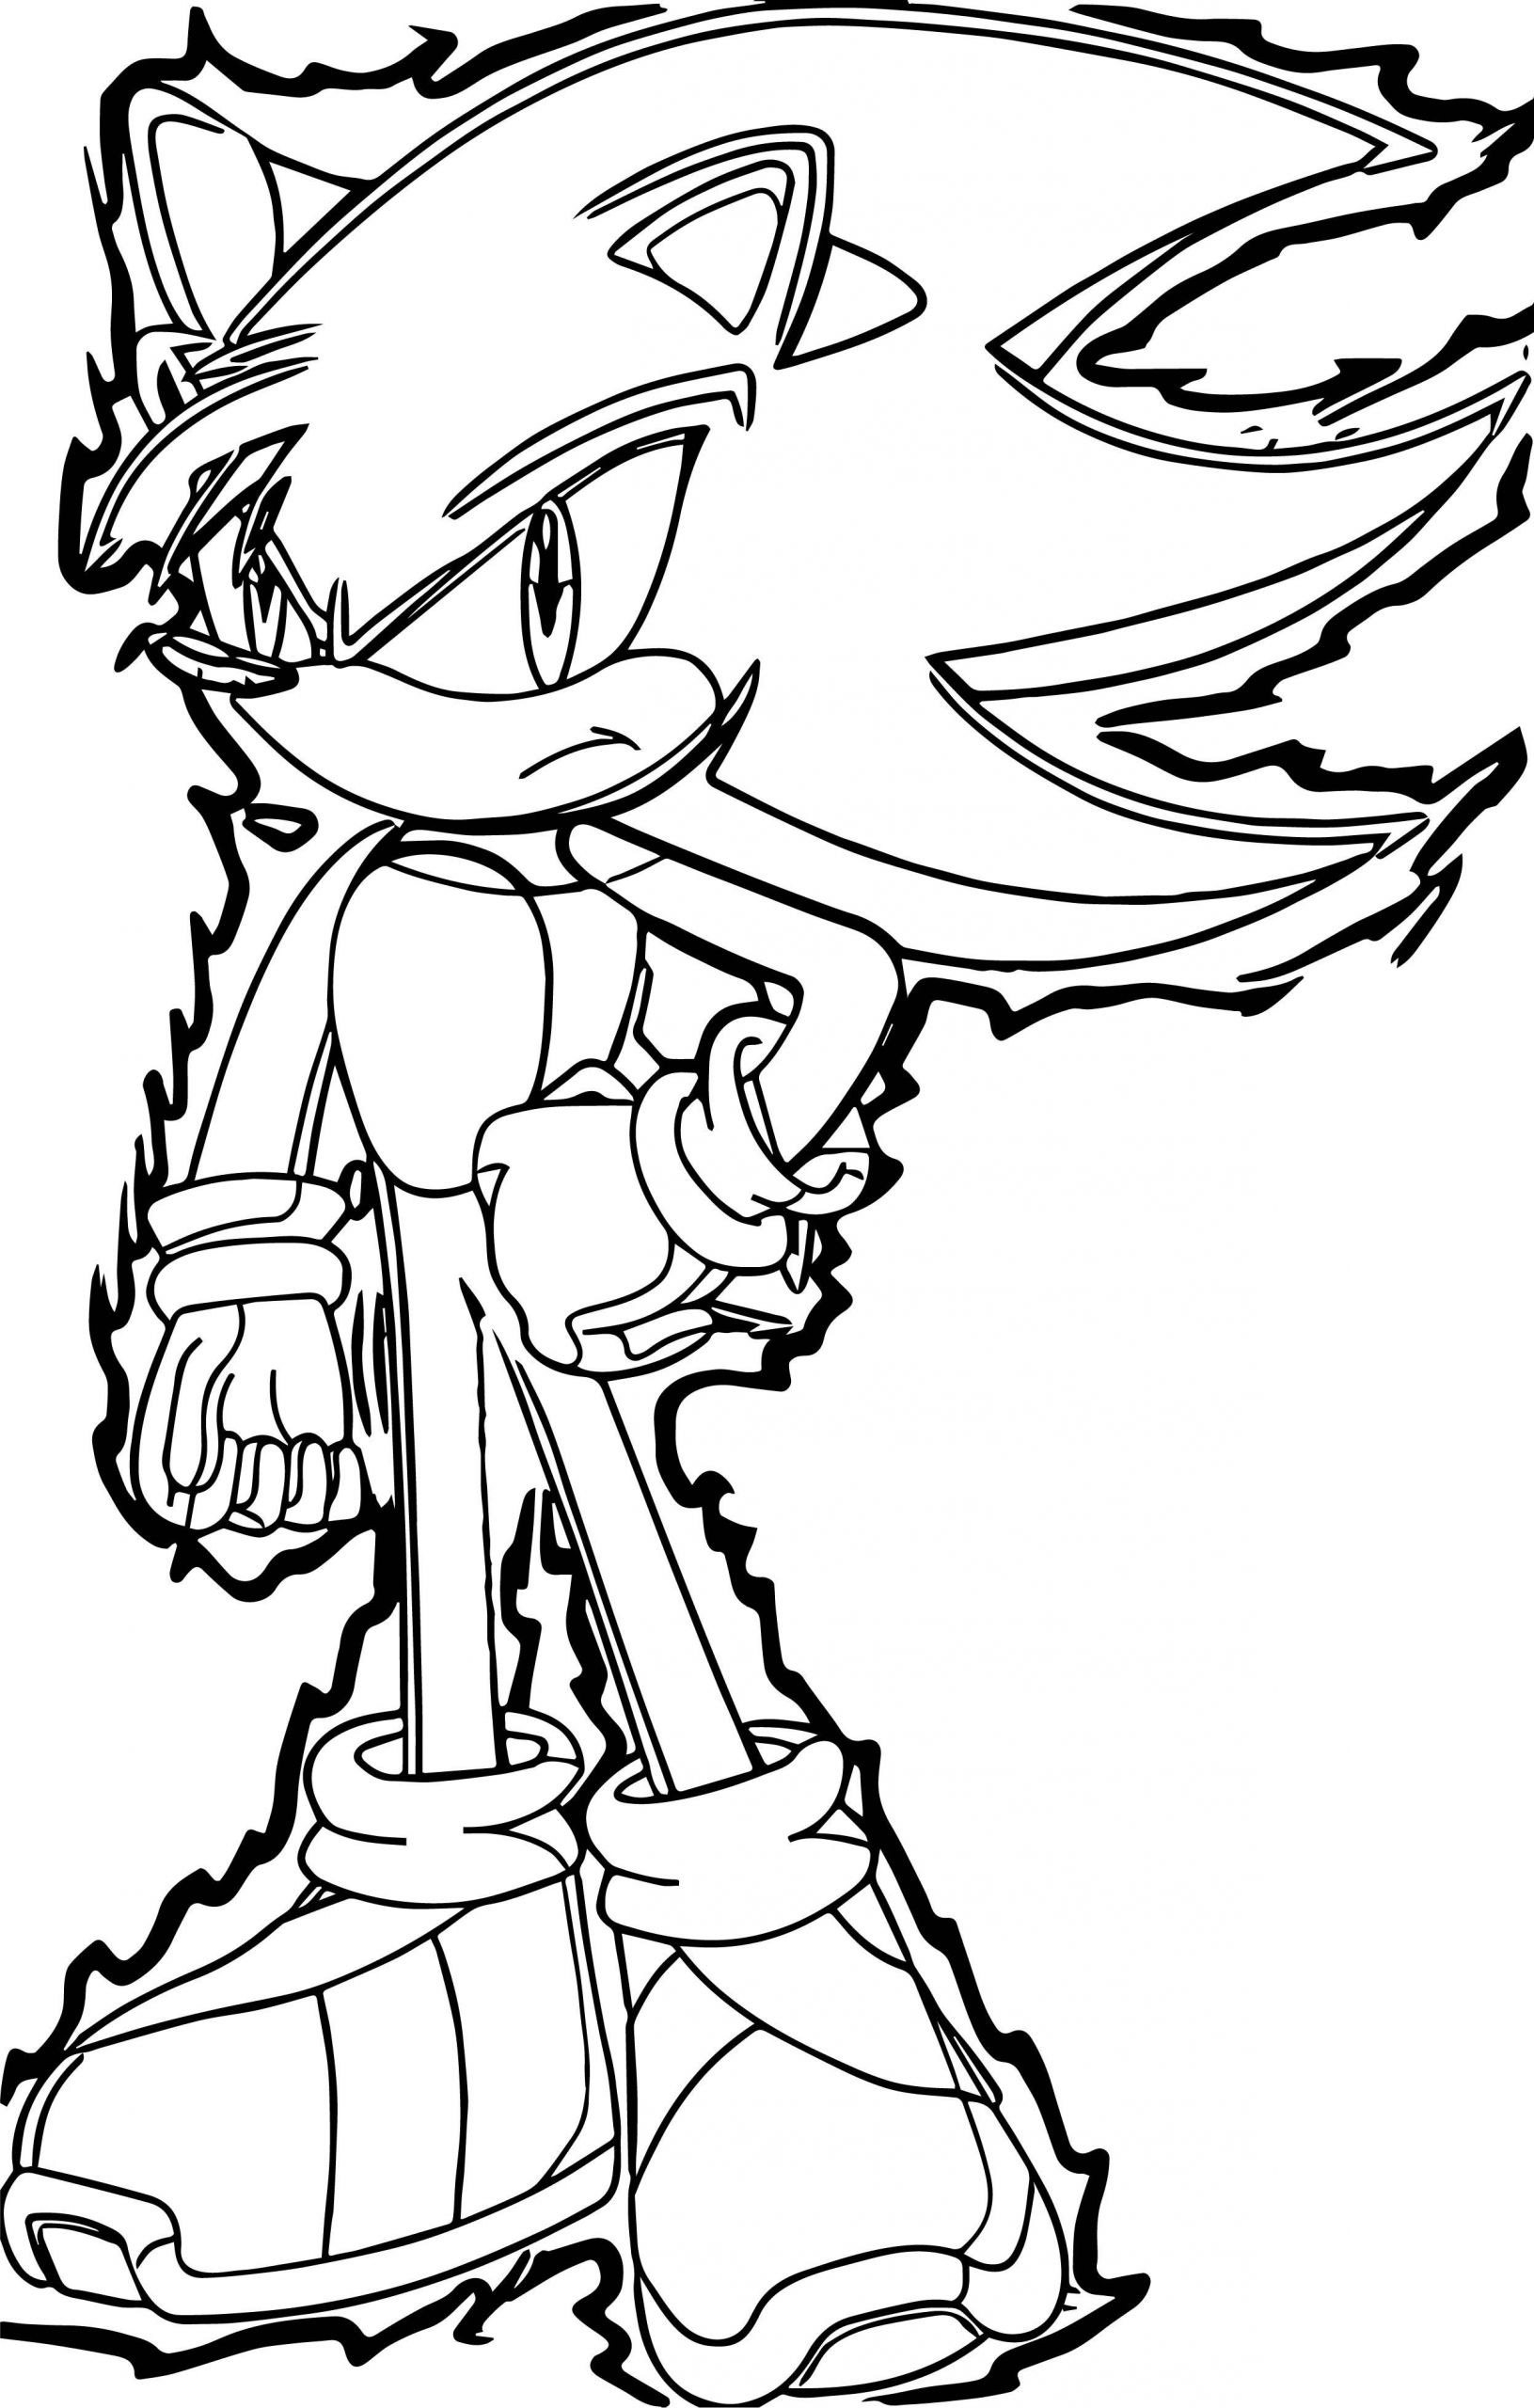 coloring pages : Sonic And Friends Coloring Pages Beautiful Sonic The  Hedgehog Worksheet Sonic and Friends Coloring Pages ~  affiliateprogrambook.com